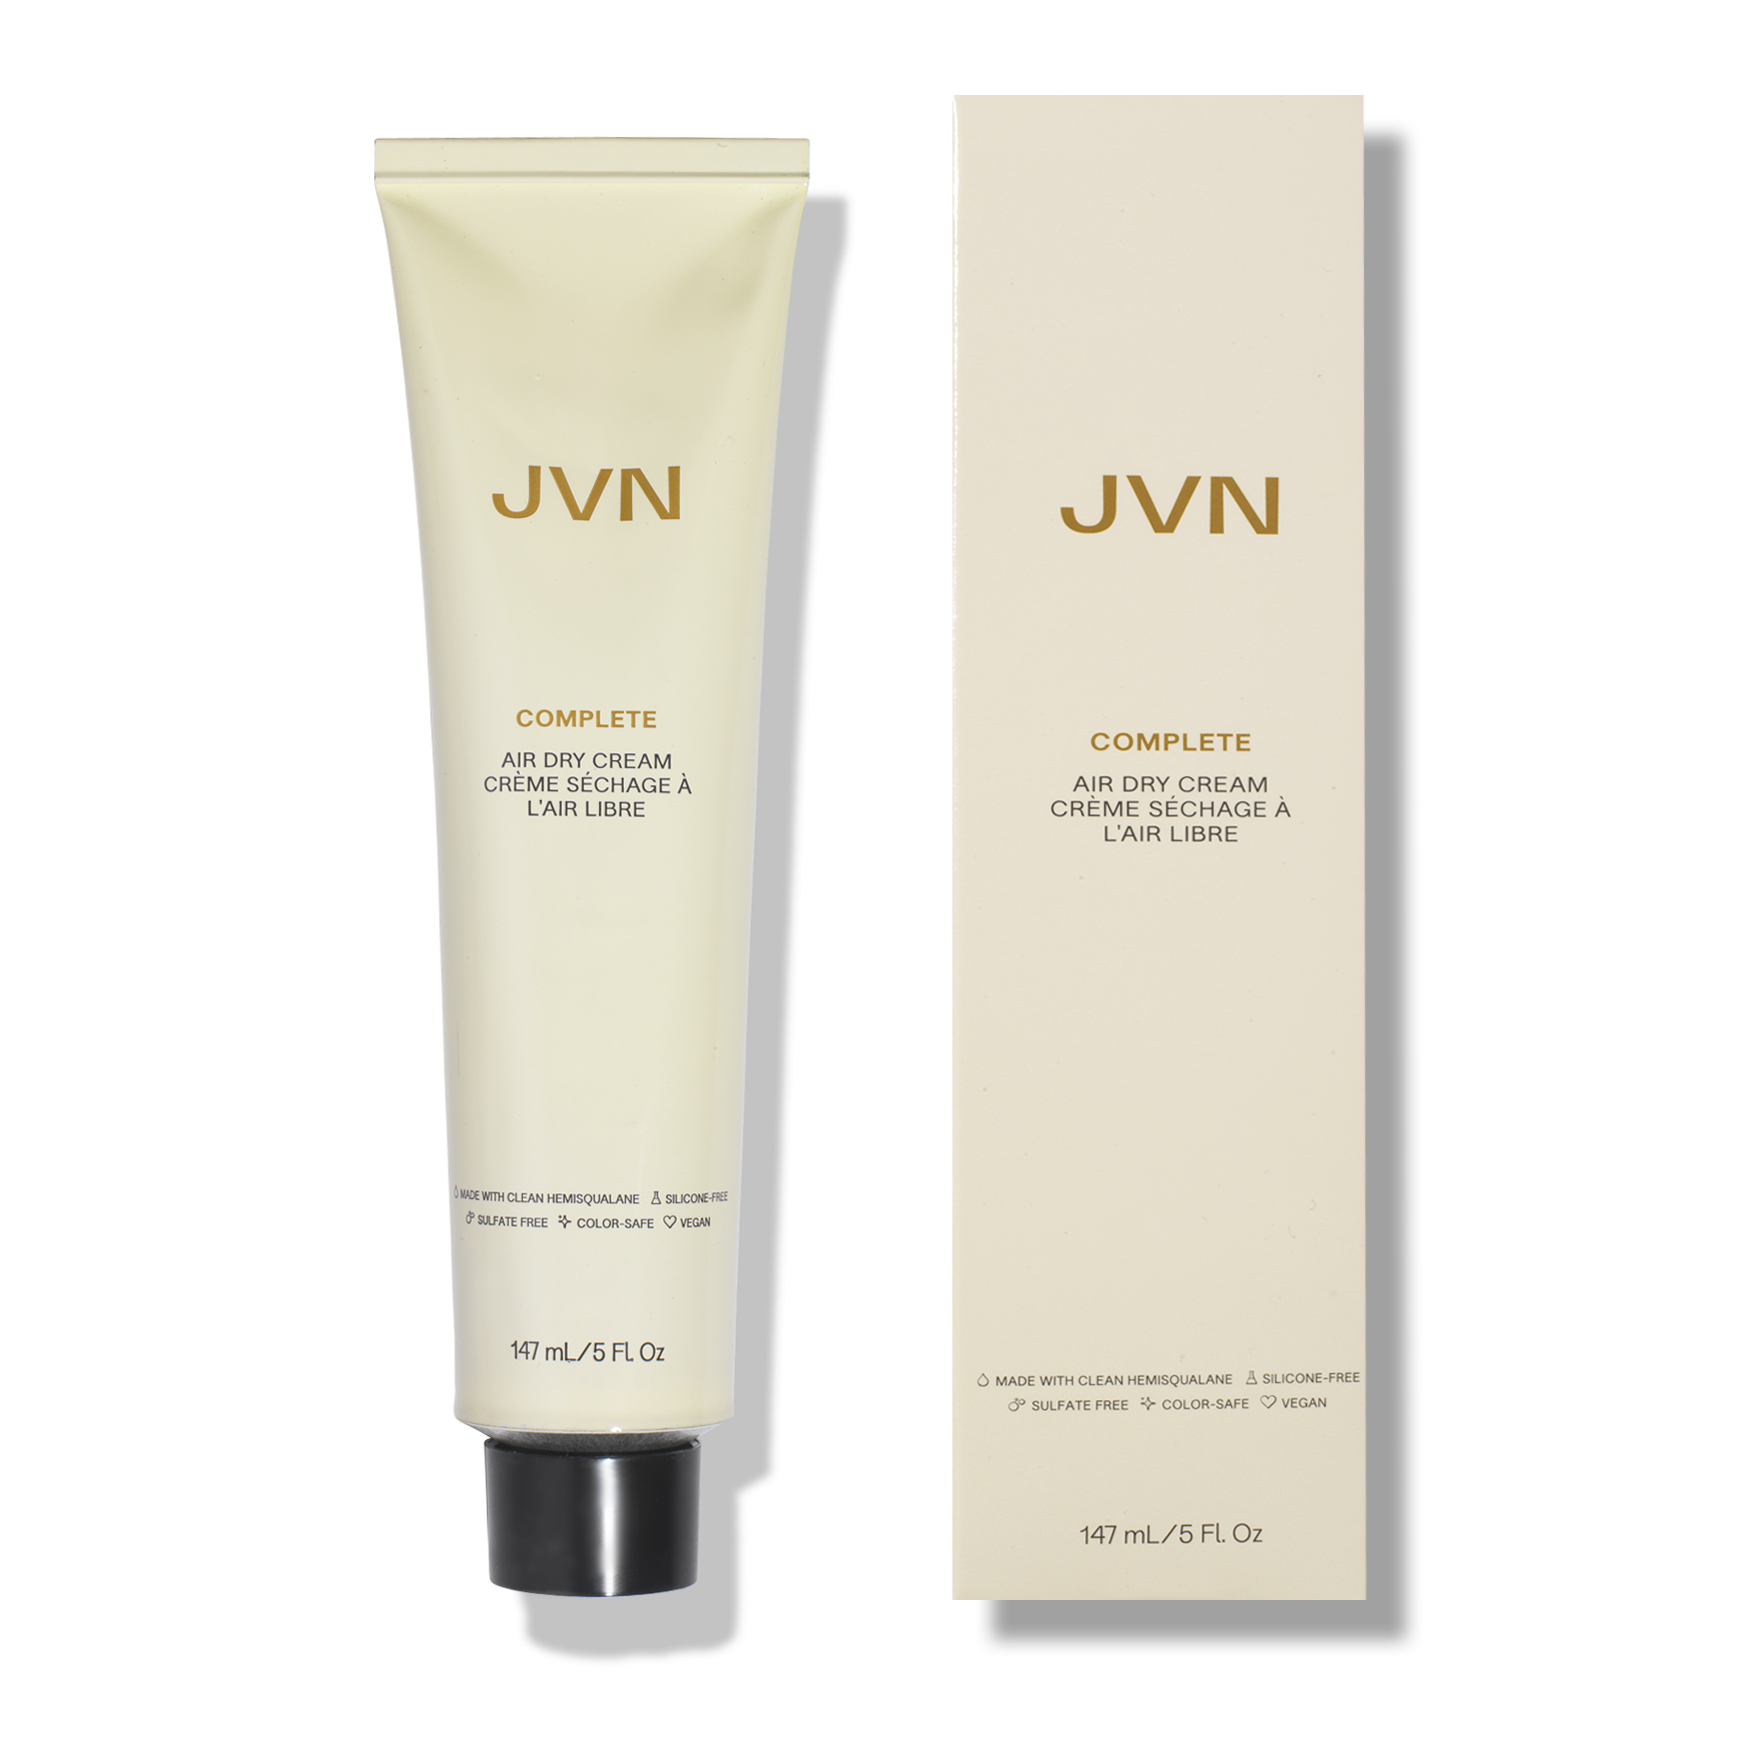 Complete Air Dry Cream | Silicone-Free Hair Styling Cream | Jvn